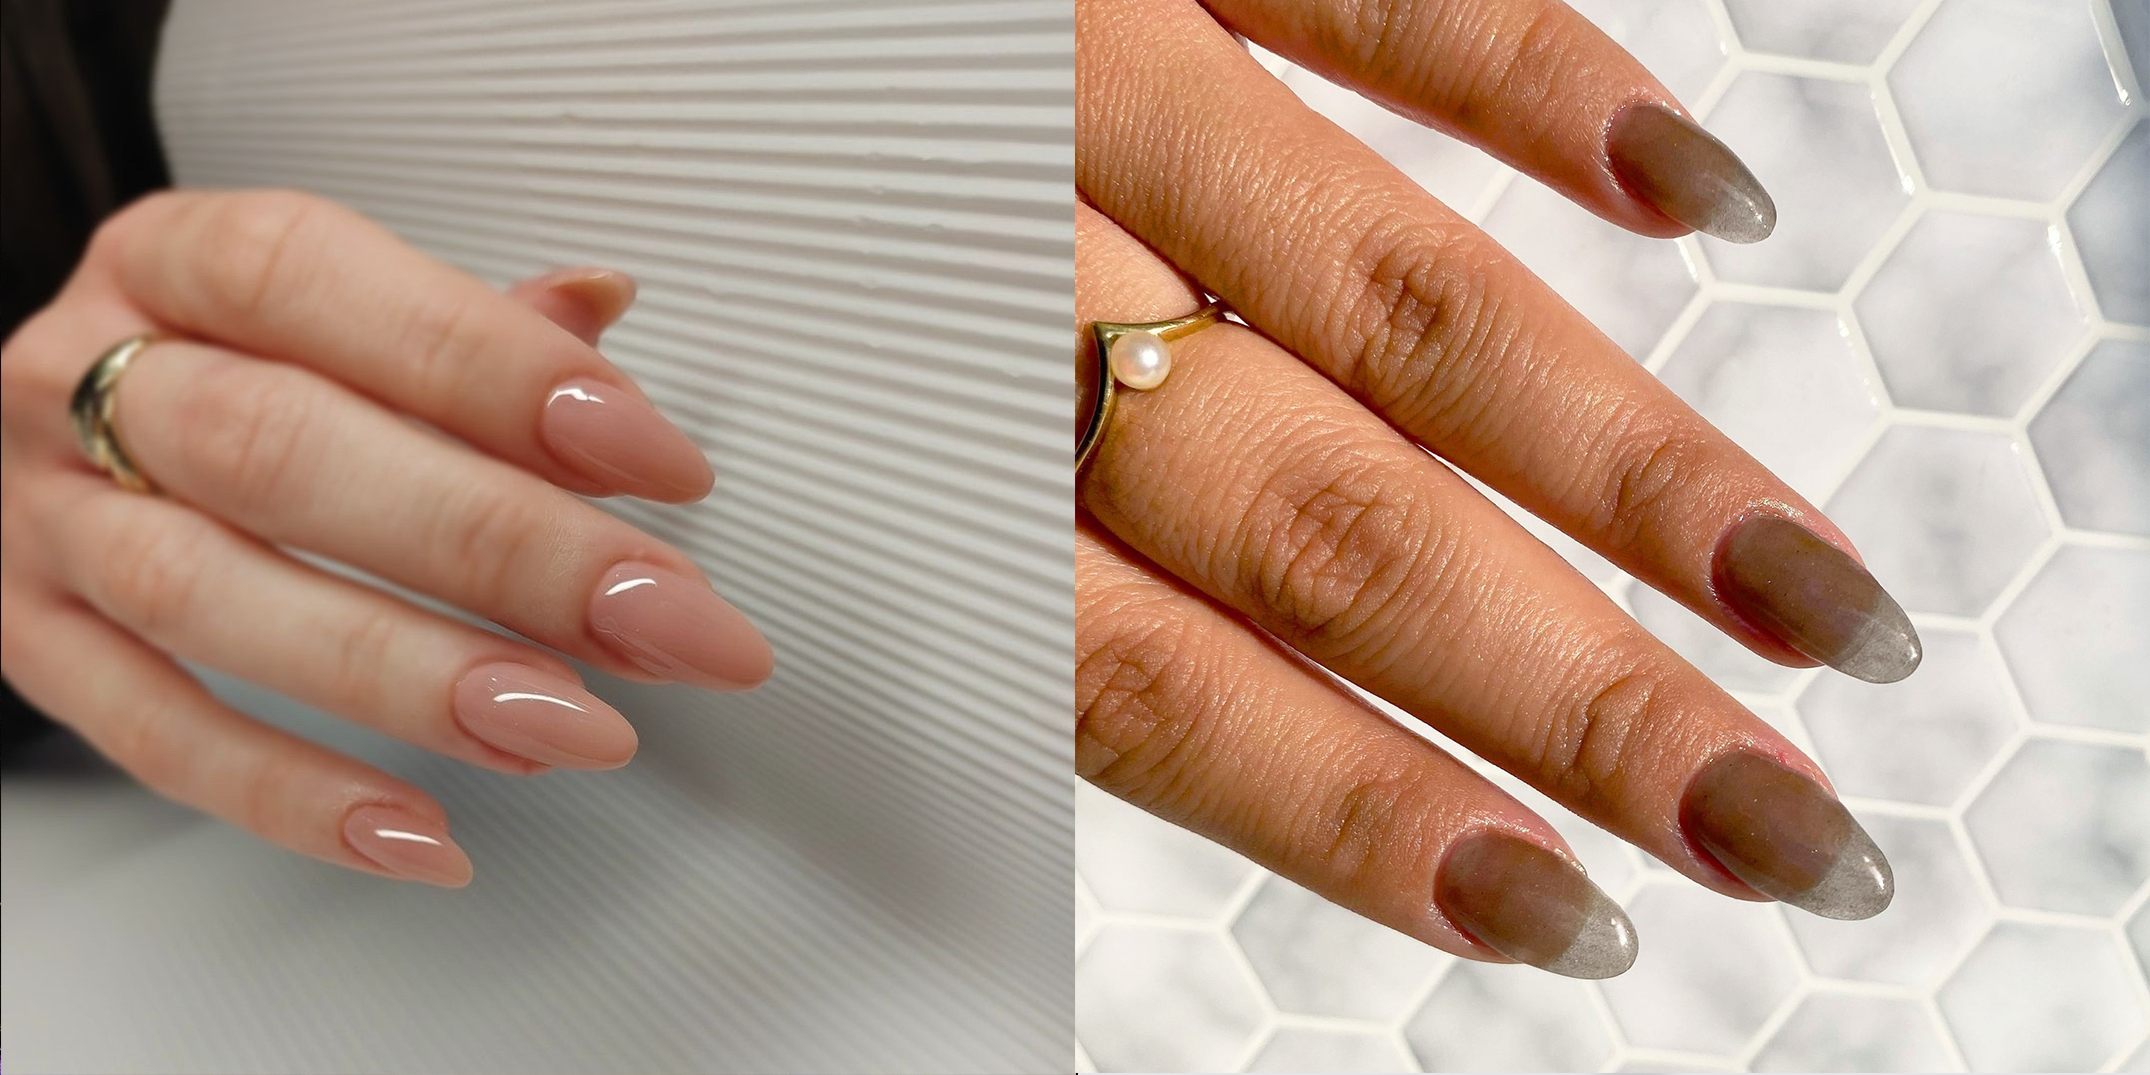 Acrylic Nail Fill Cost: How Much is a Nail Fill?